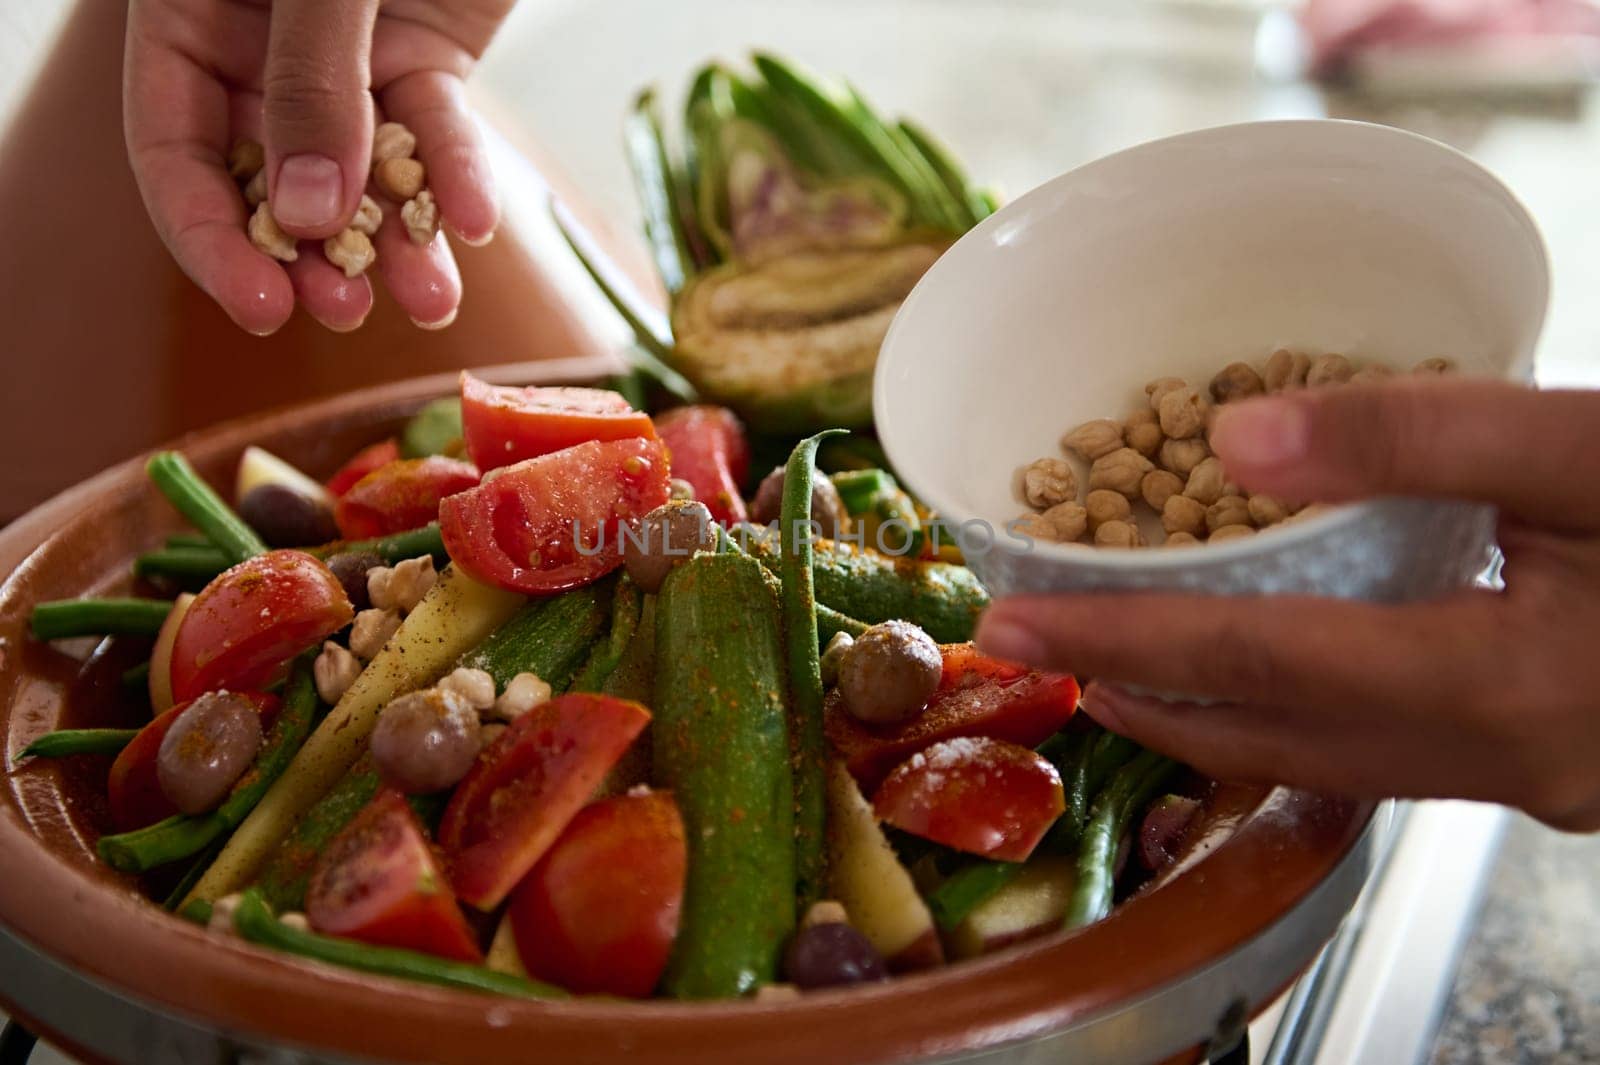 Closeup of the hands of a housewife adding chickpeas into a vegetarian meal while cooking healthy organic veggies in clay tagine pot. Traditional Moroccan food background